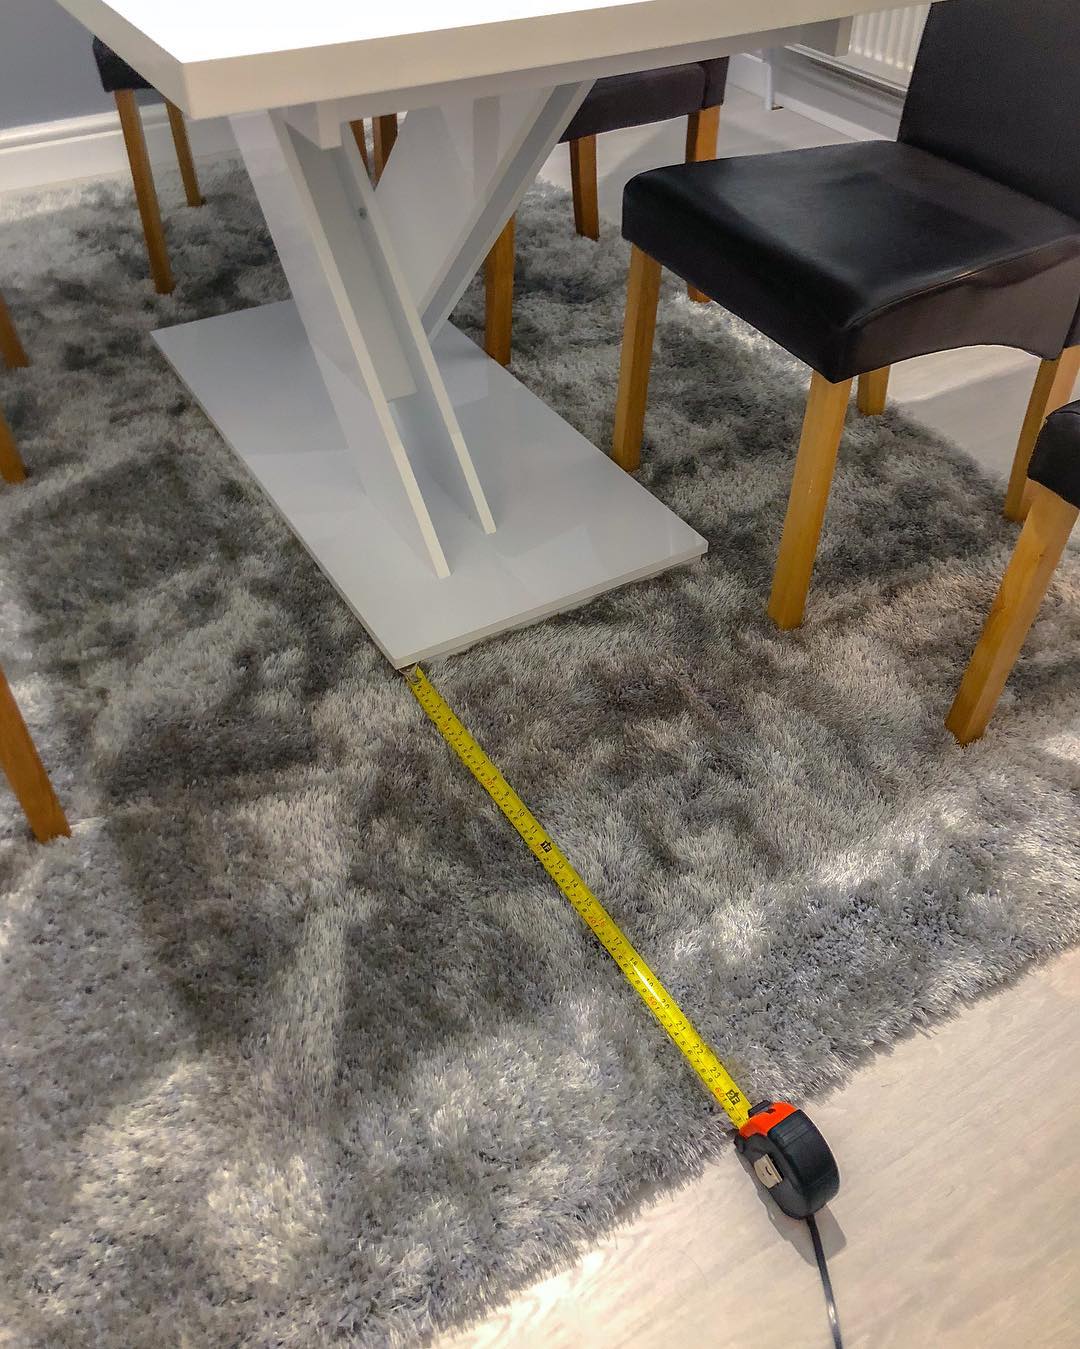 Measuring the distance between a table and carpet.